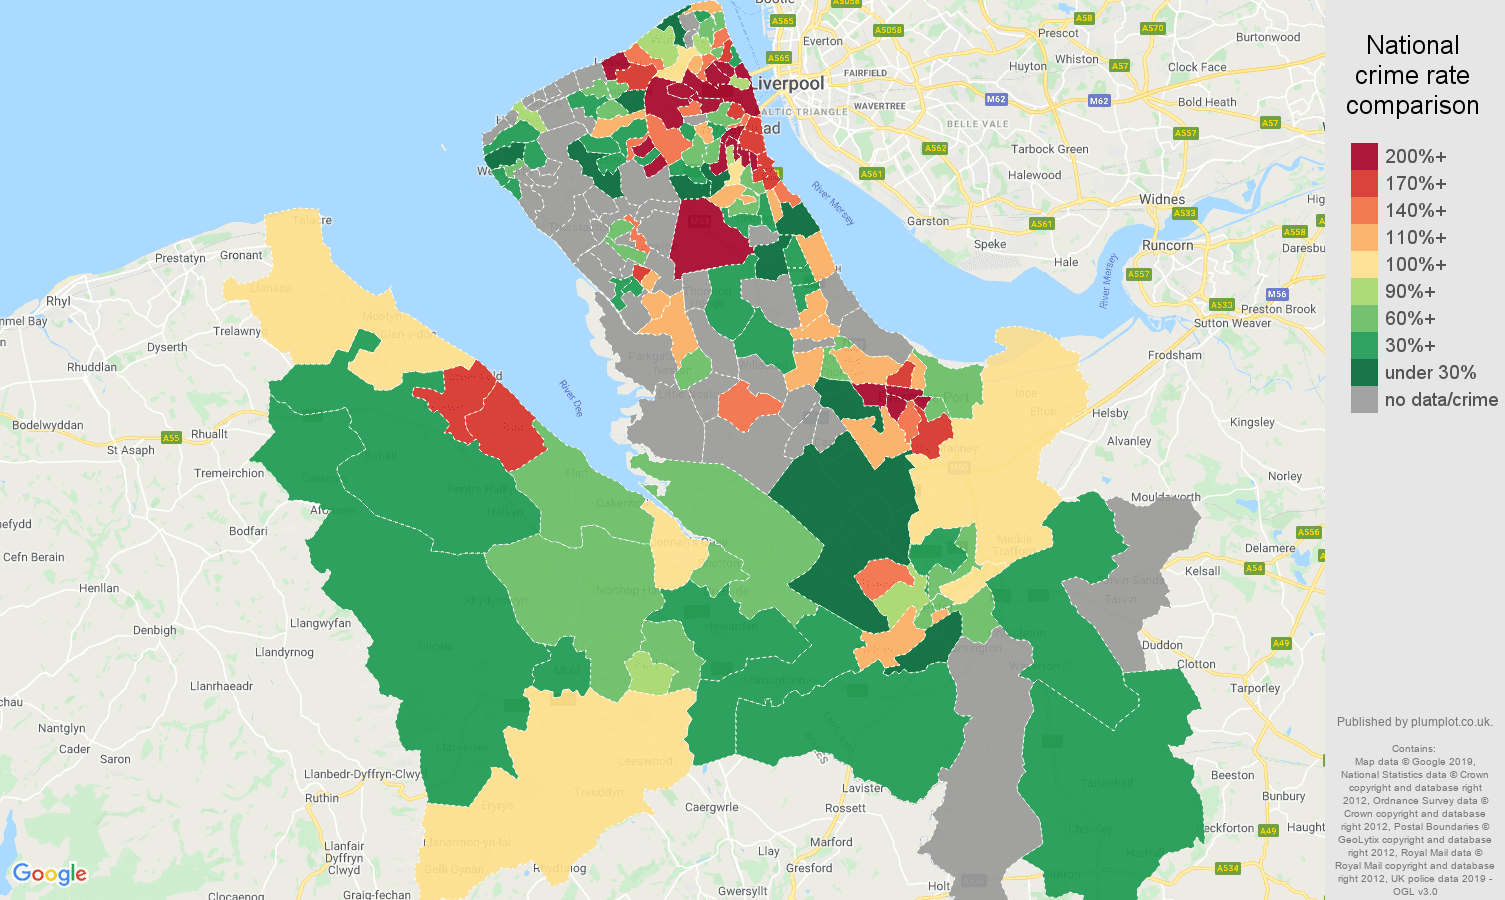 Chester other crime rate comparison map